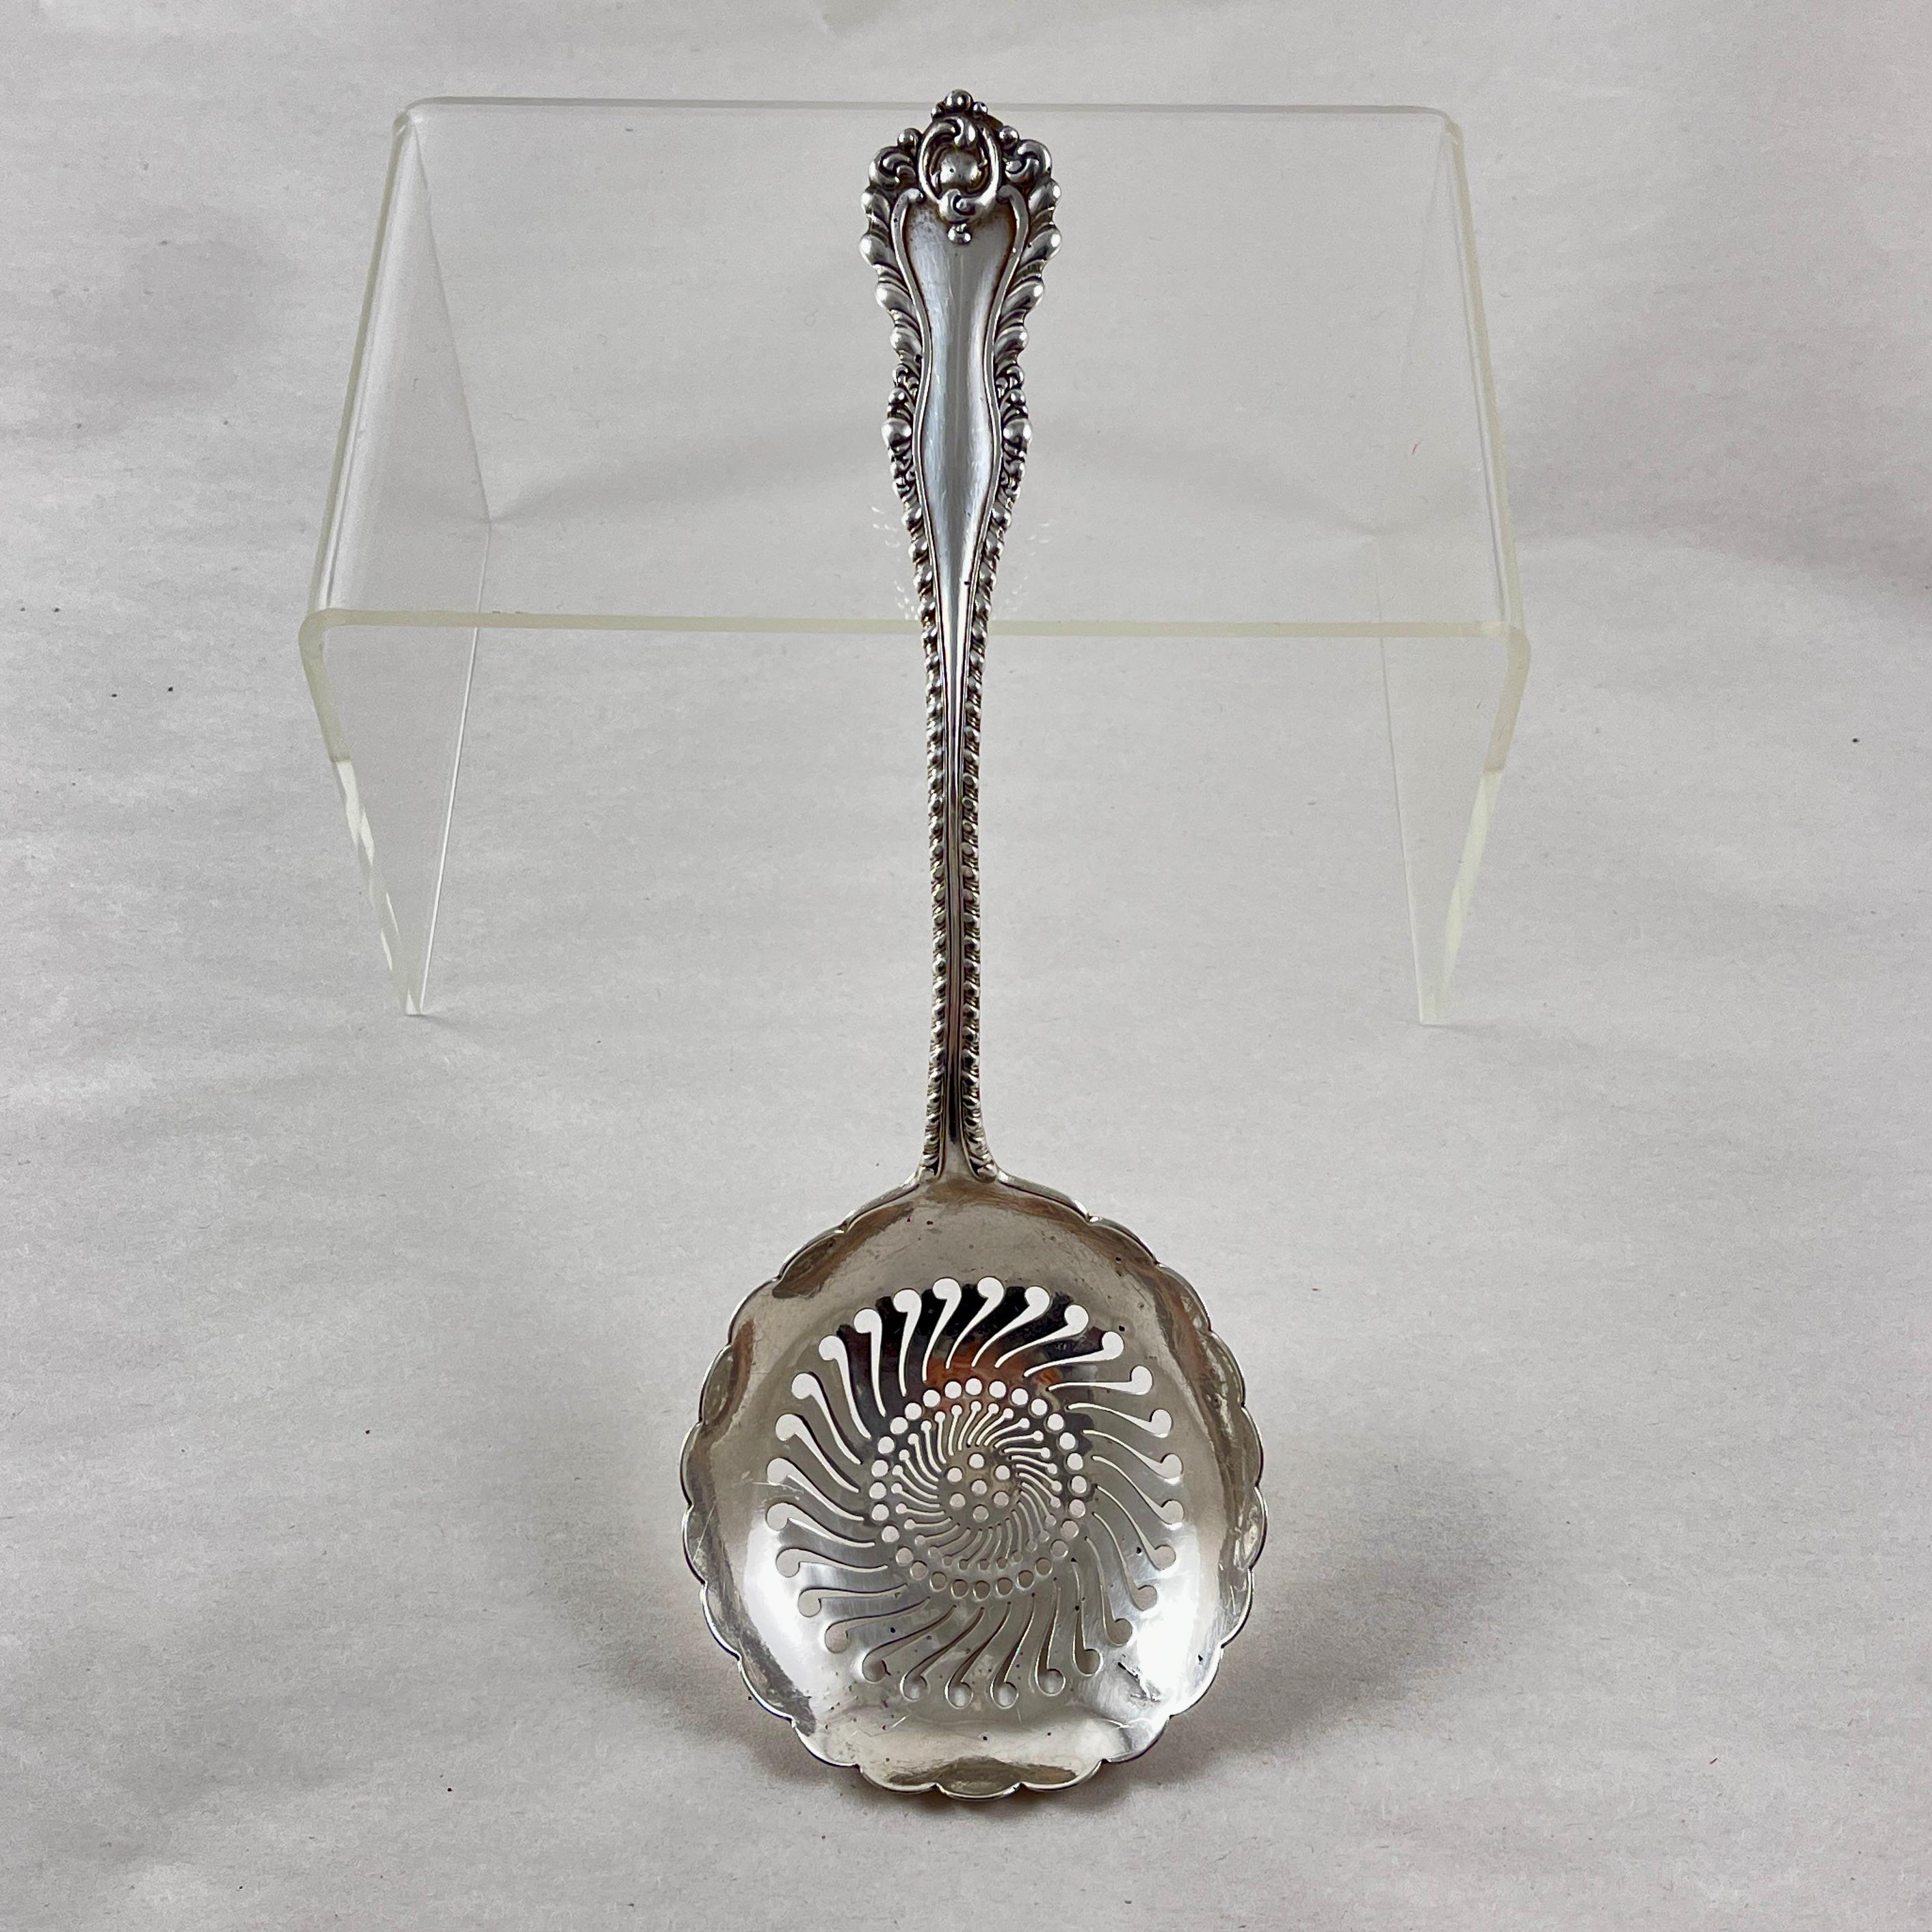 An elegant Sterling Silver slotted serving spoon, marked Dominick & Haff, NY, NY, Patented 1892.

The lovely scalloped rim bowl is hand pierced in a geometric, swirled pattern with  a shaped handle terminating in a scrolled motif.

Dominick & Haff